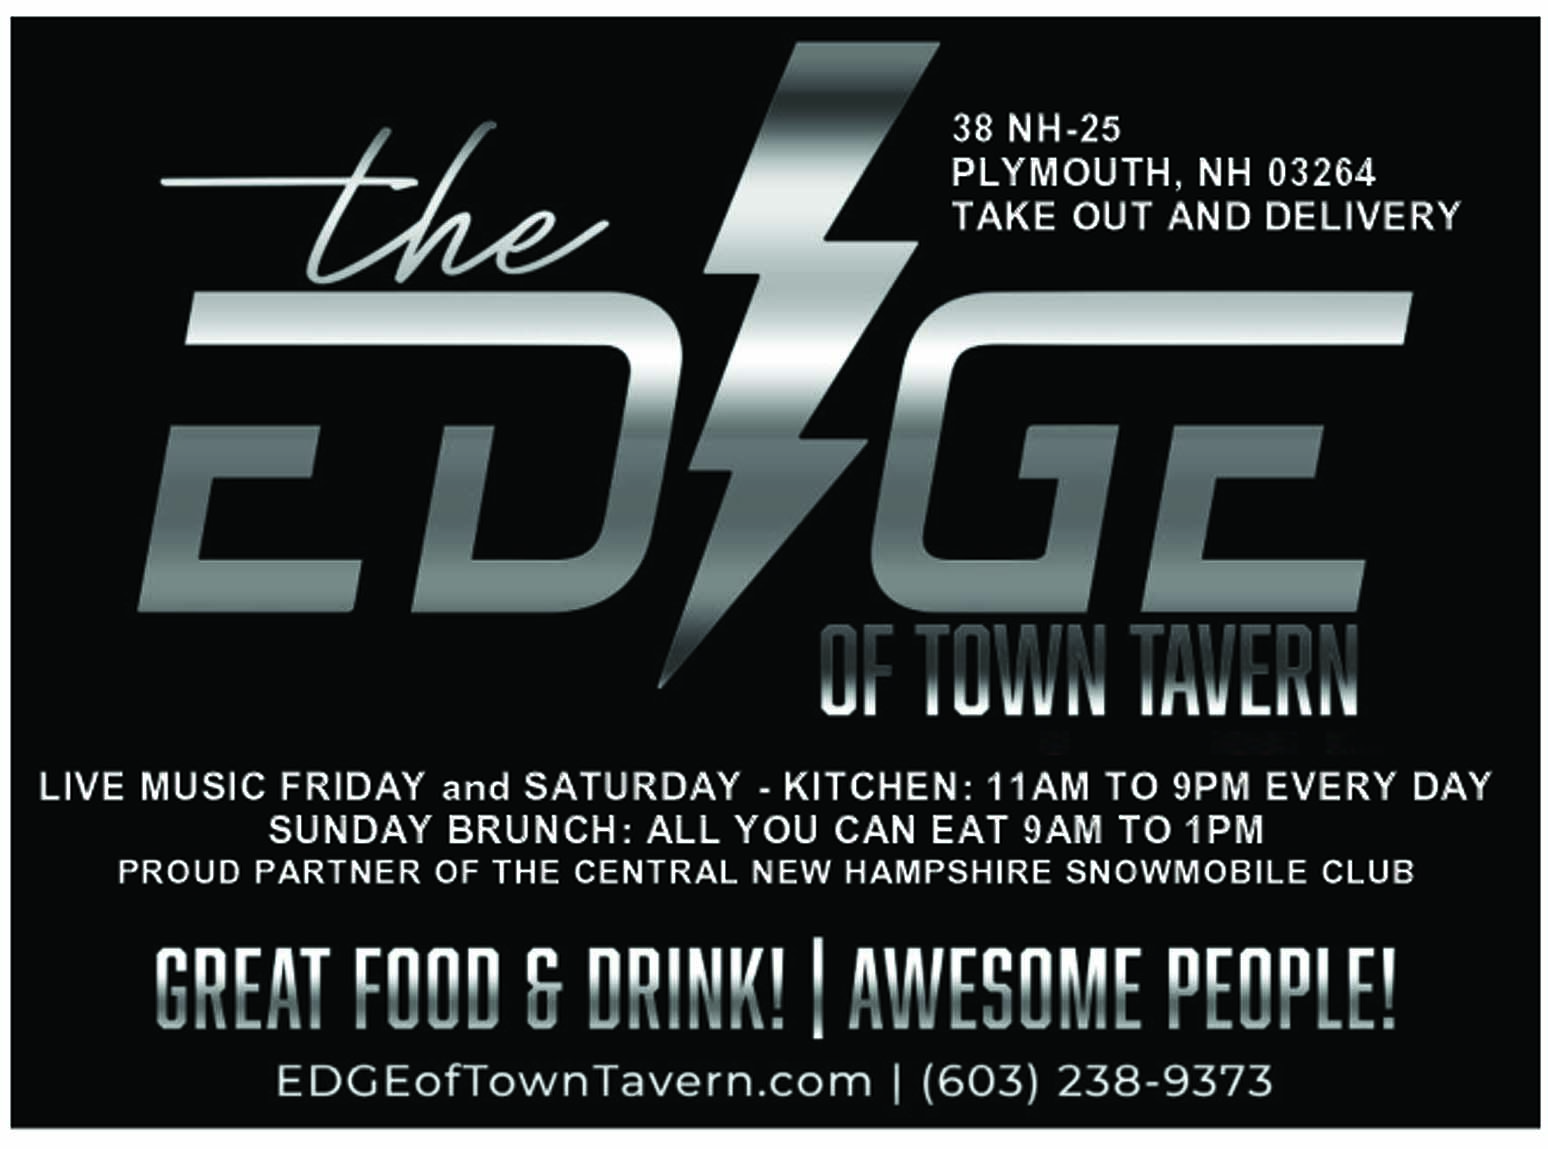 The Edge of Town Tavern is a unique and exciting restaurant that offers a little bit of everything.